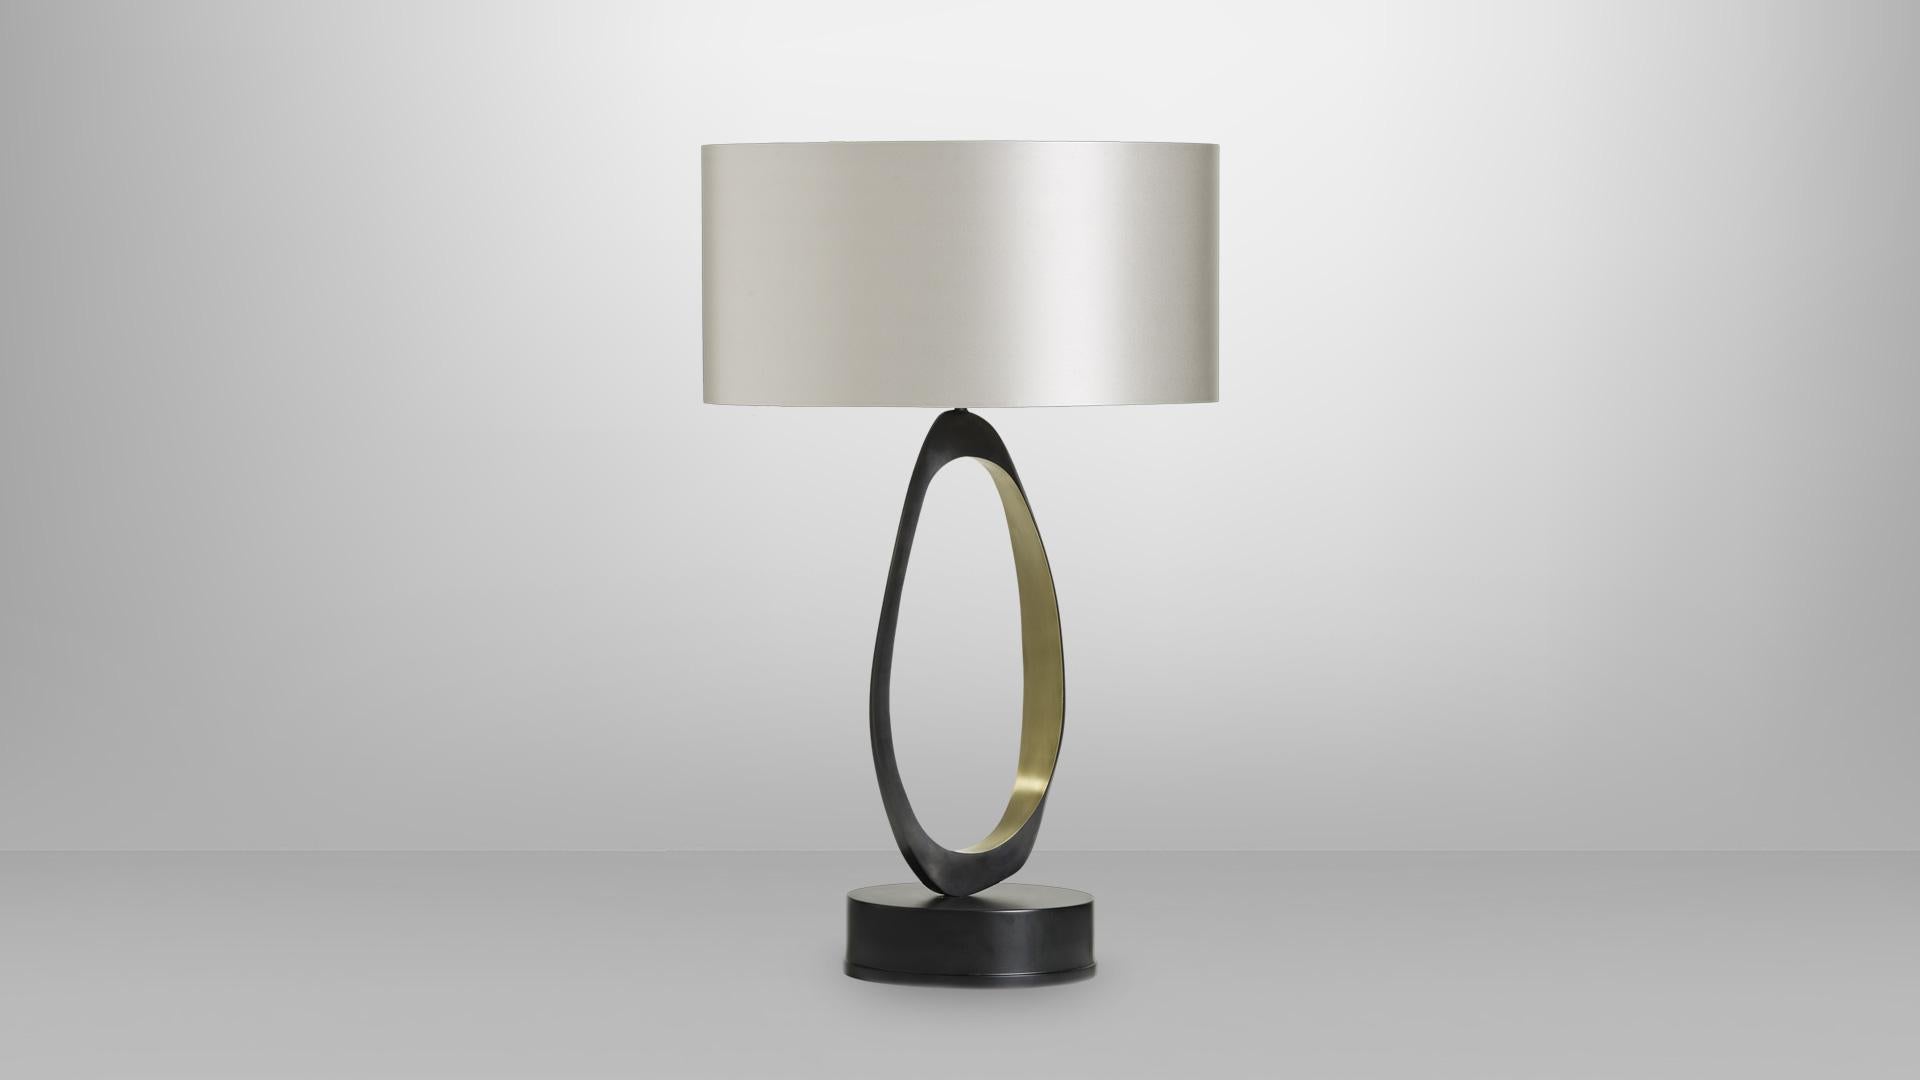 Stella table lamp by CTO Lighting
Materials: bronze with satin brass and black base, dove grey silk shade with silk diffuser
Also available in bronze with satin brass and black base, slate grey silk shade with silk diffuser
bronze with satin brass